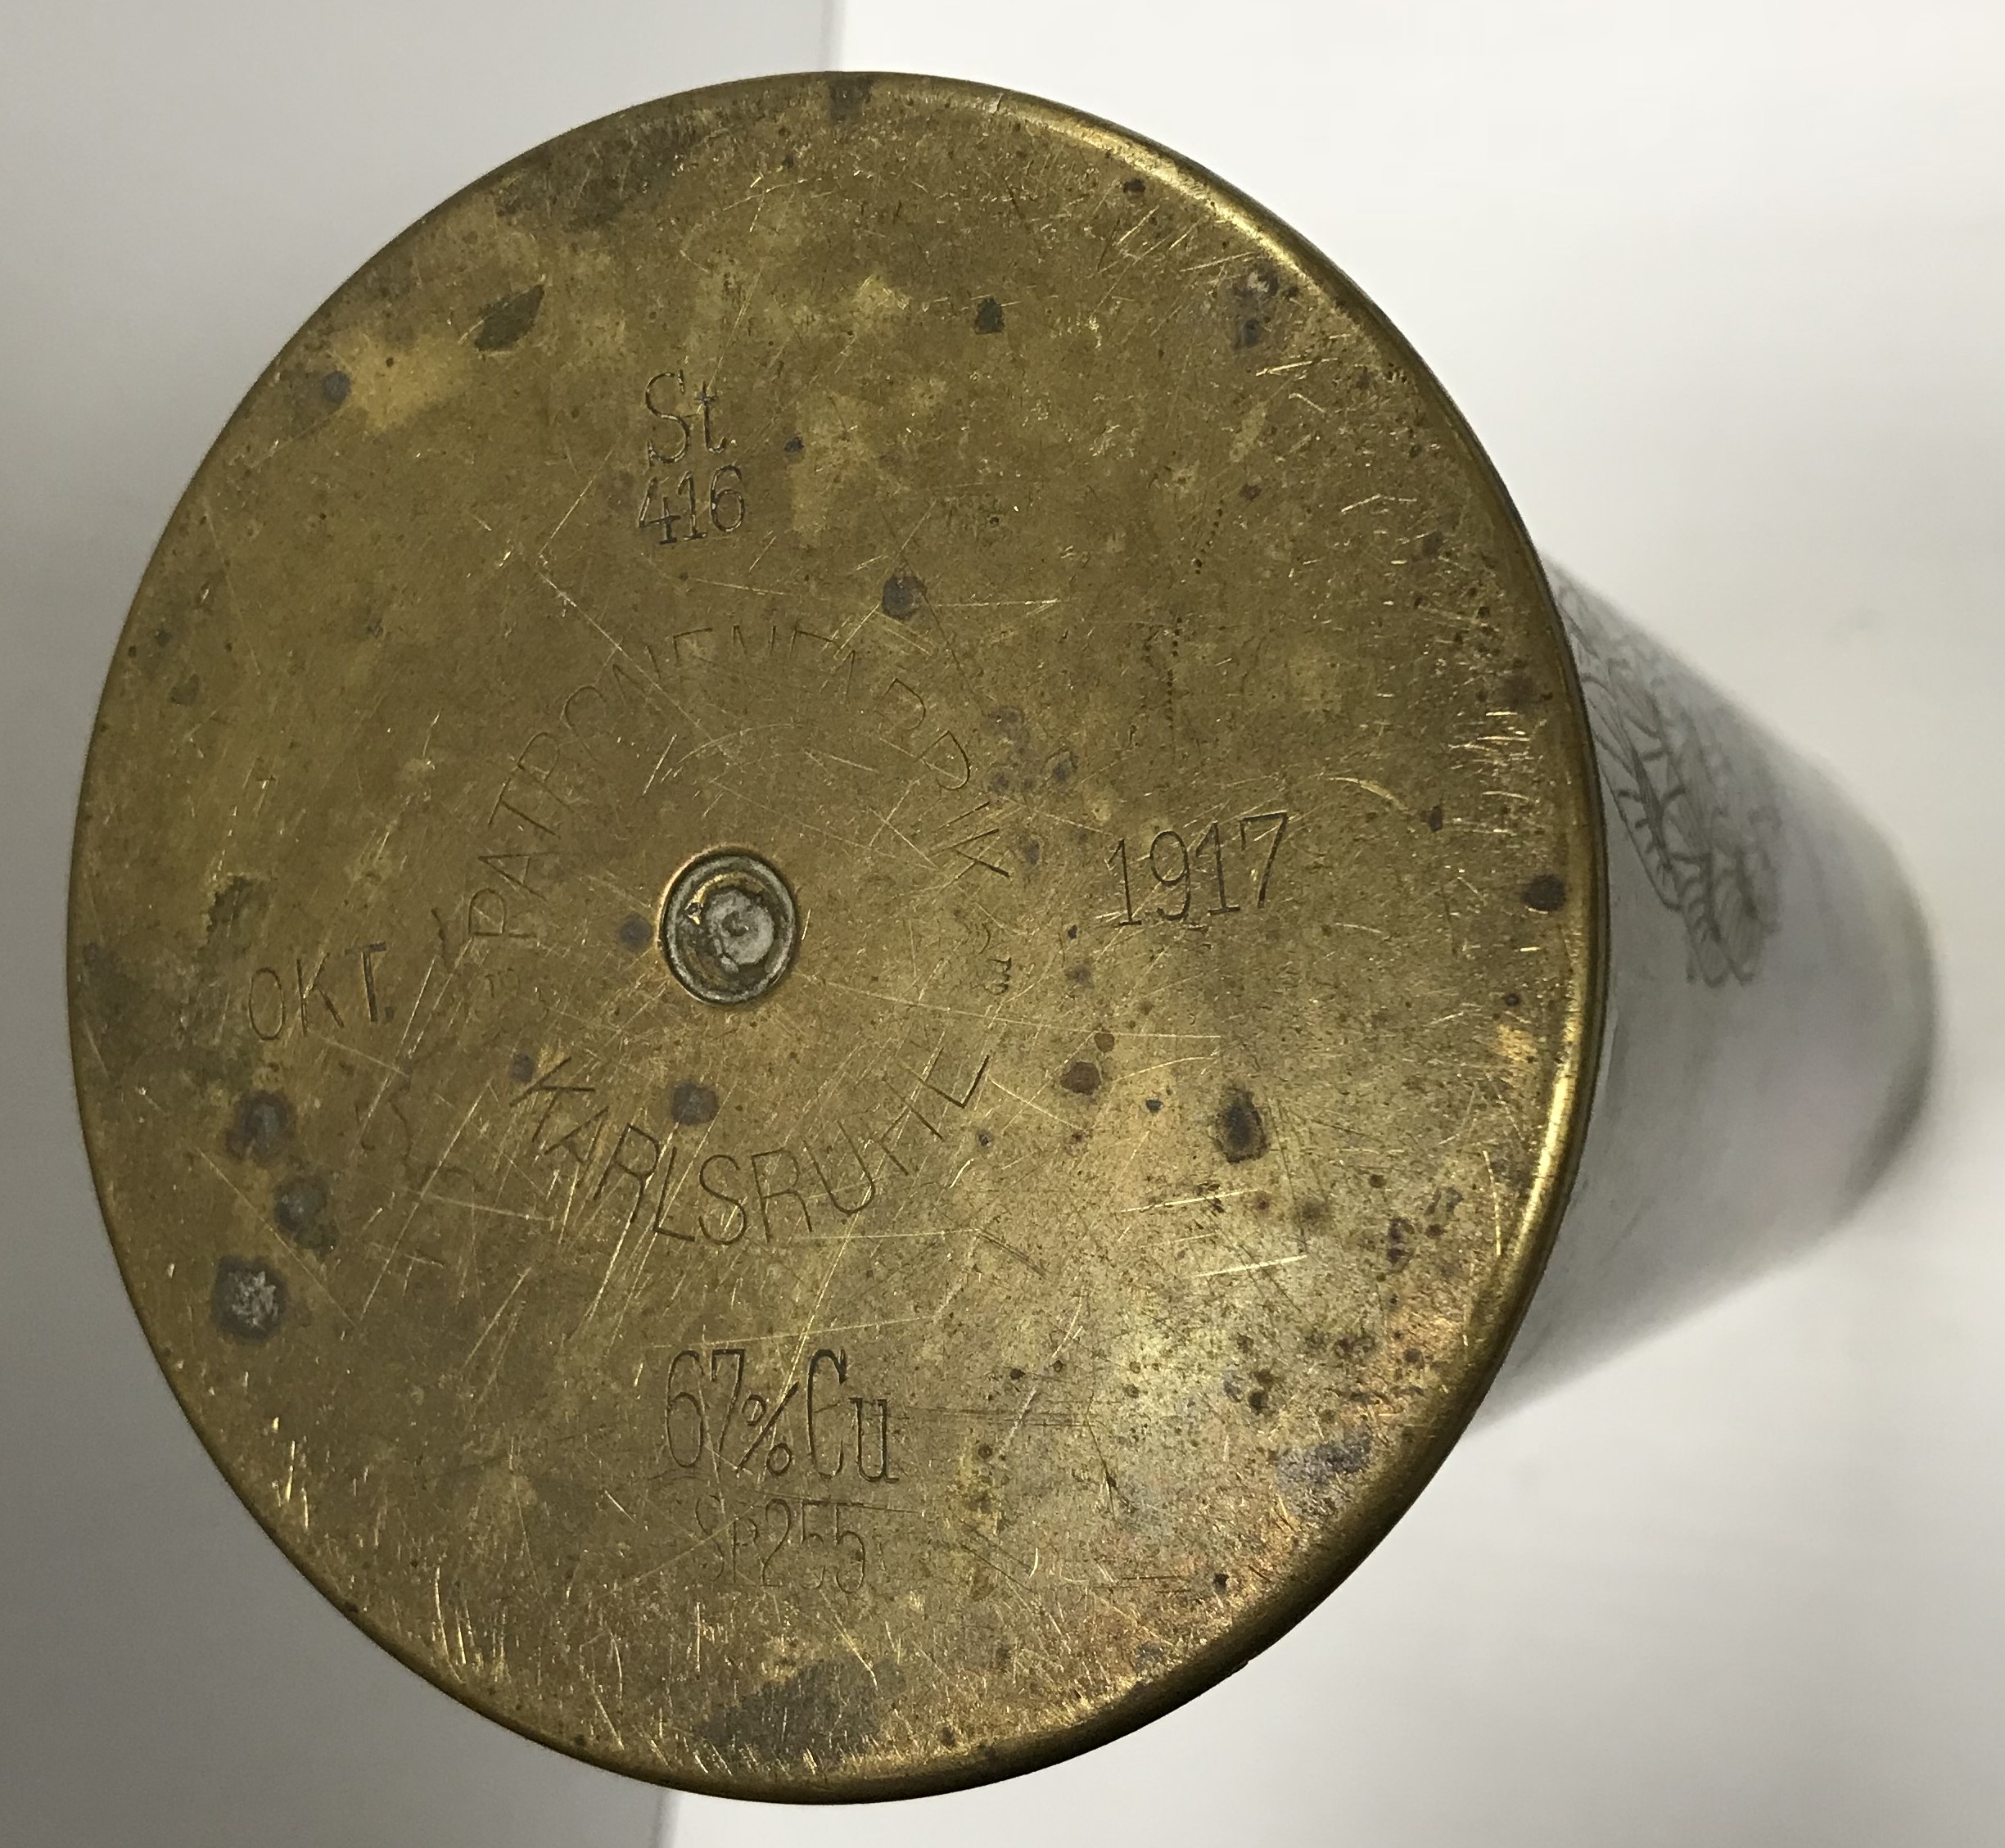 WITHDRAWN A collection of various militaria including a 1917 brass shell case decorated with two - Image 3 of 3